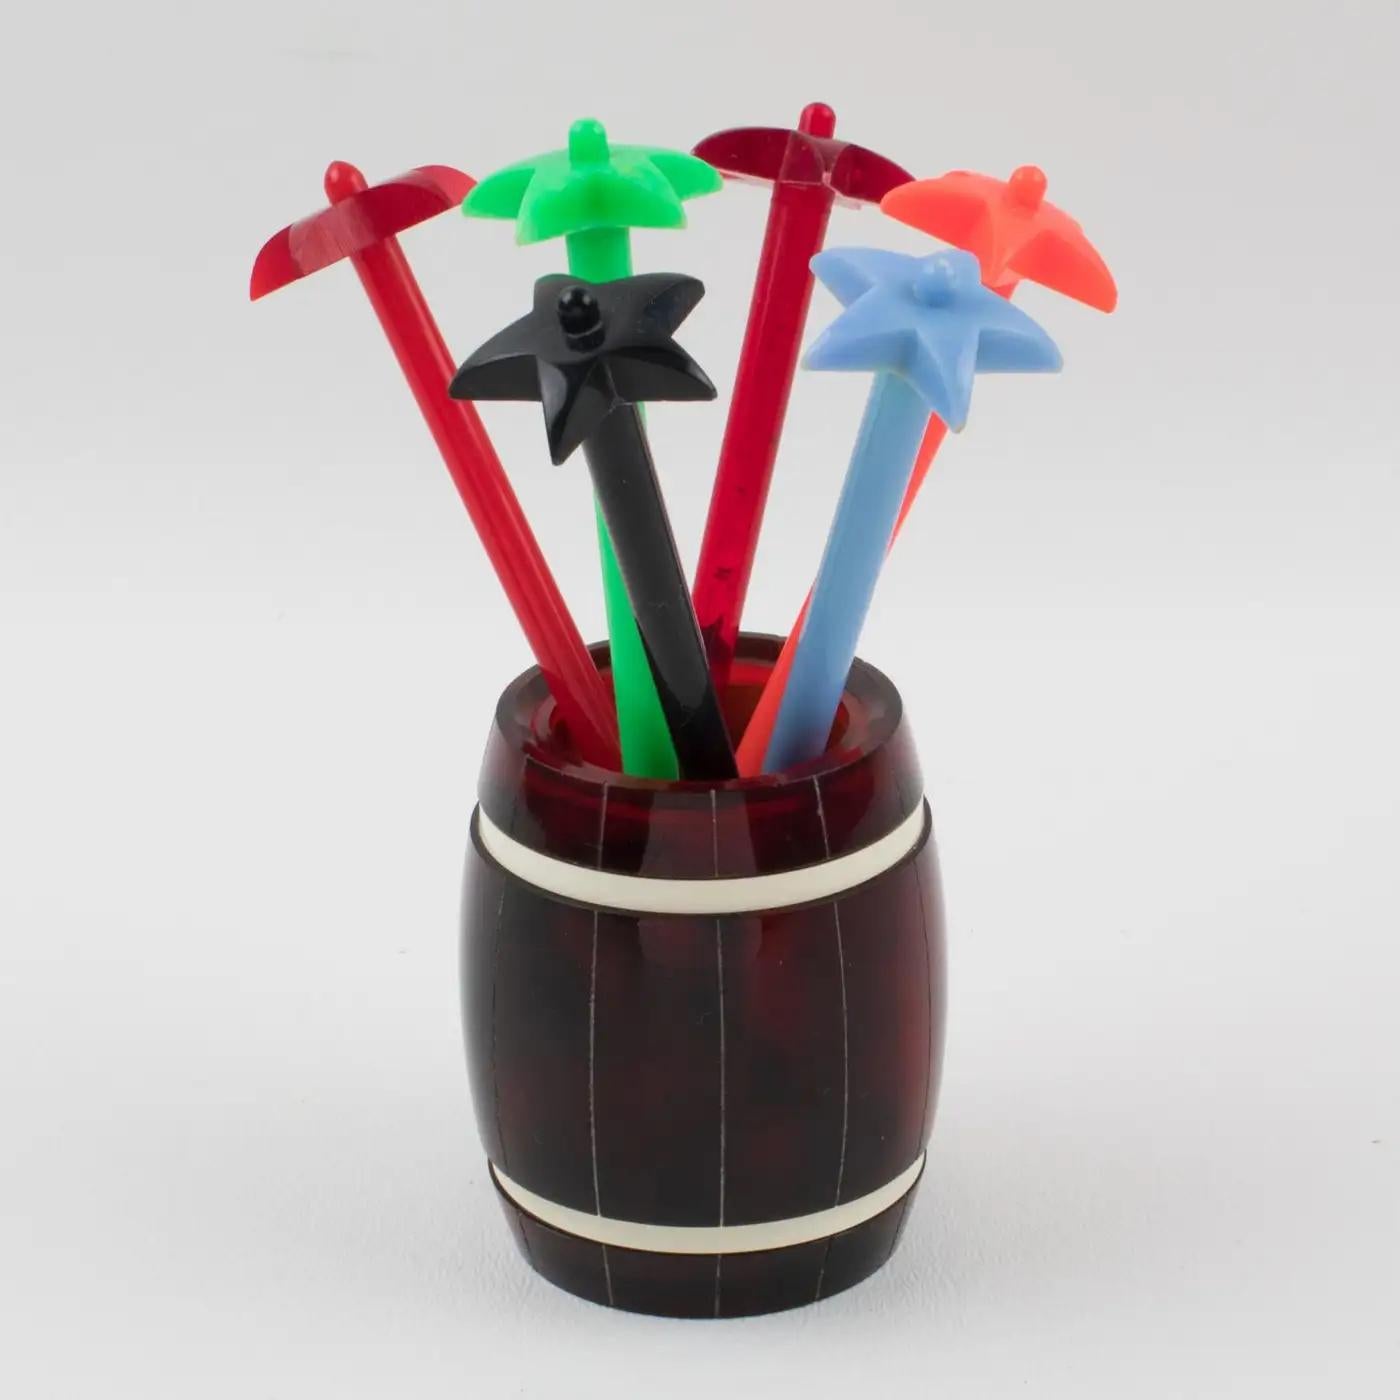 This lovely barware bar cocktail set of stirrers was made in France in the 1950s. This Mid-Century bar set is built with tortoiseshell (tortoise) marble Lucite featuring an oversized barrel holder with six long multicolor hard plastic stir sticks